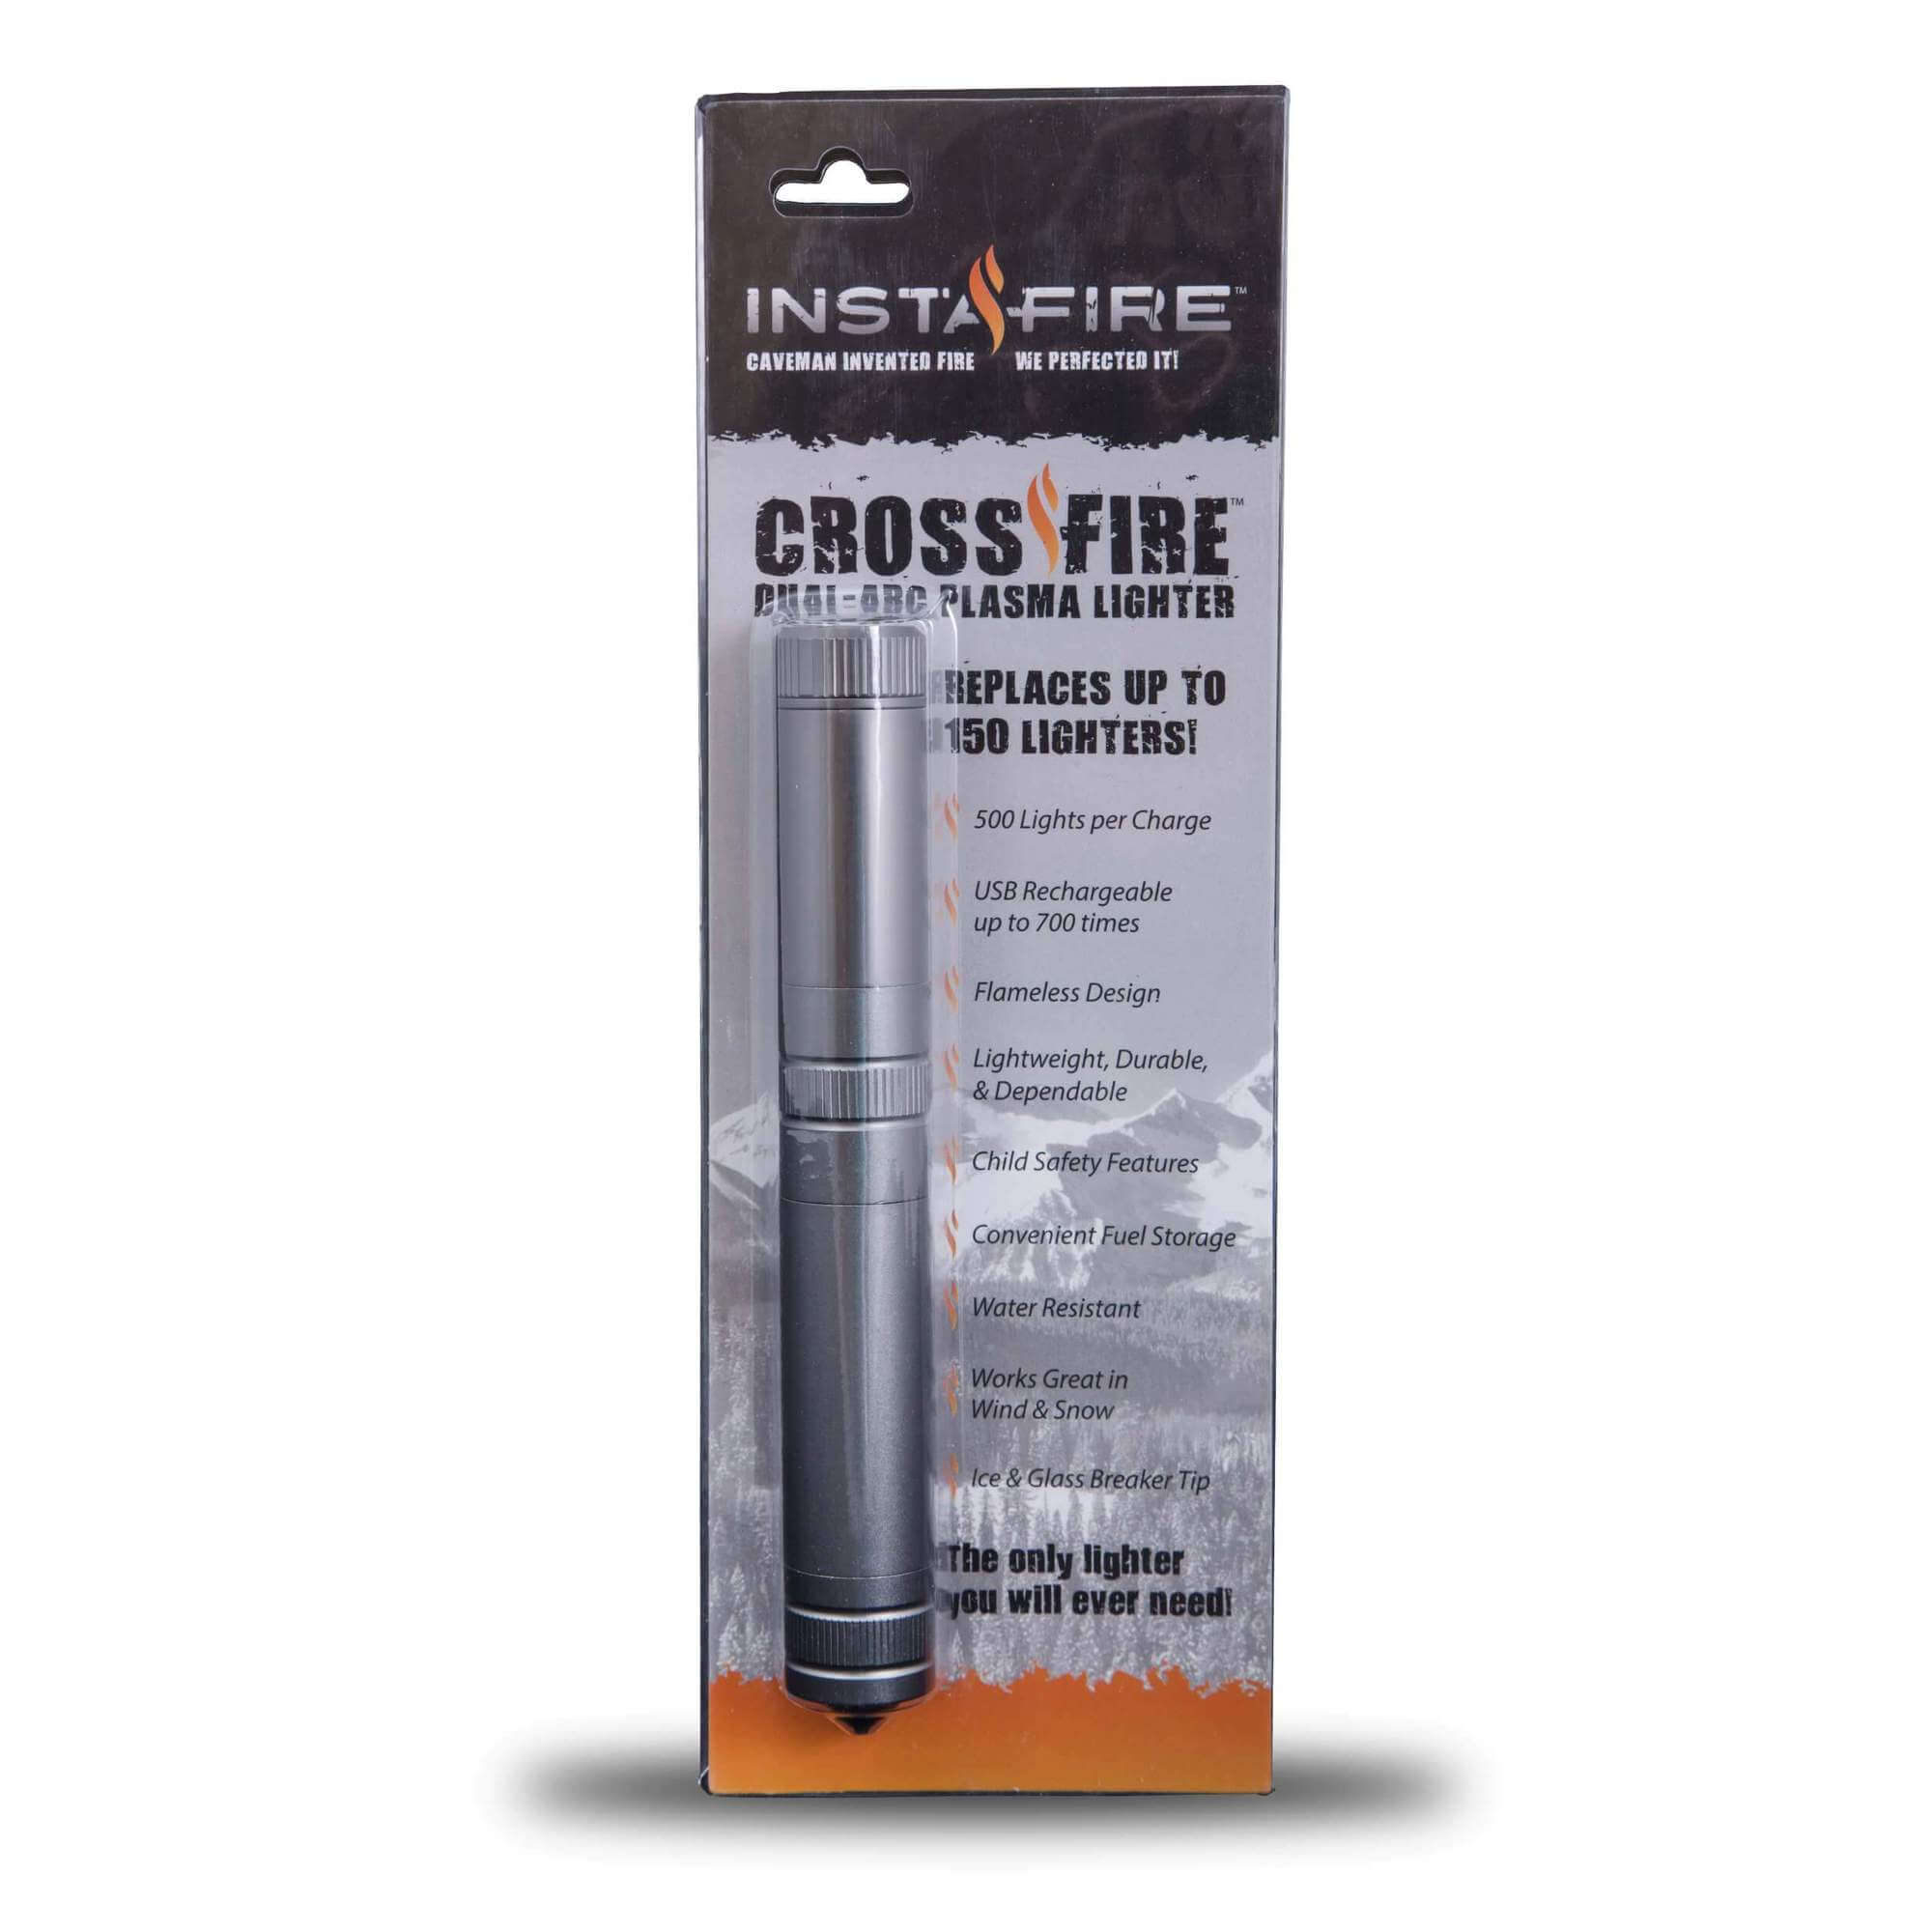 The ReadyWise (formerly Wise Food Storage) Cross Fire Dual-Arc Plasma Lighter (SHIPS IN 1-2 WEEKS) is packaged in a box.